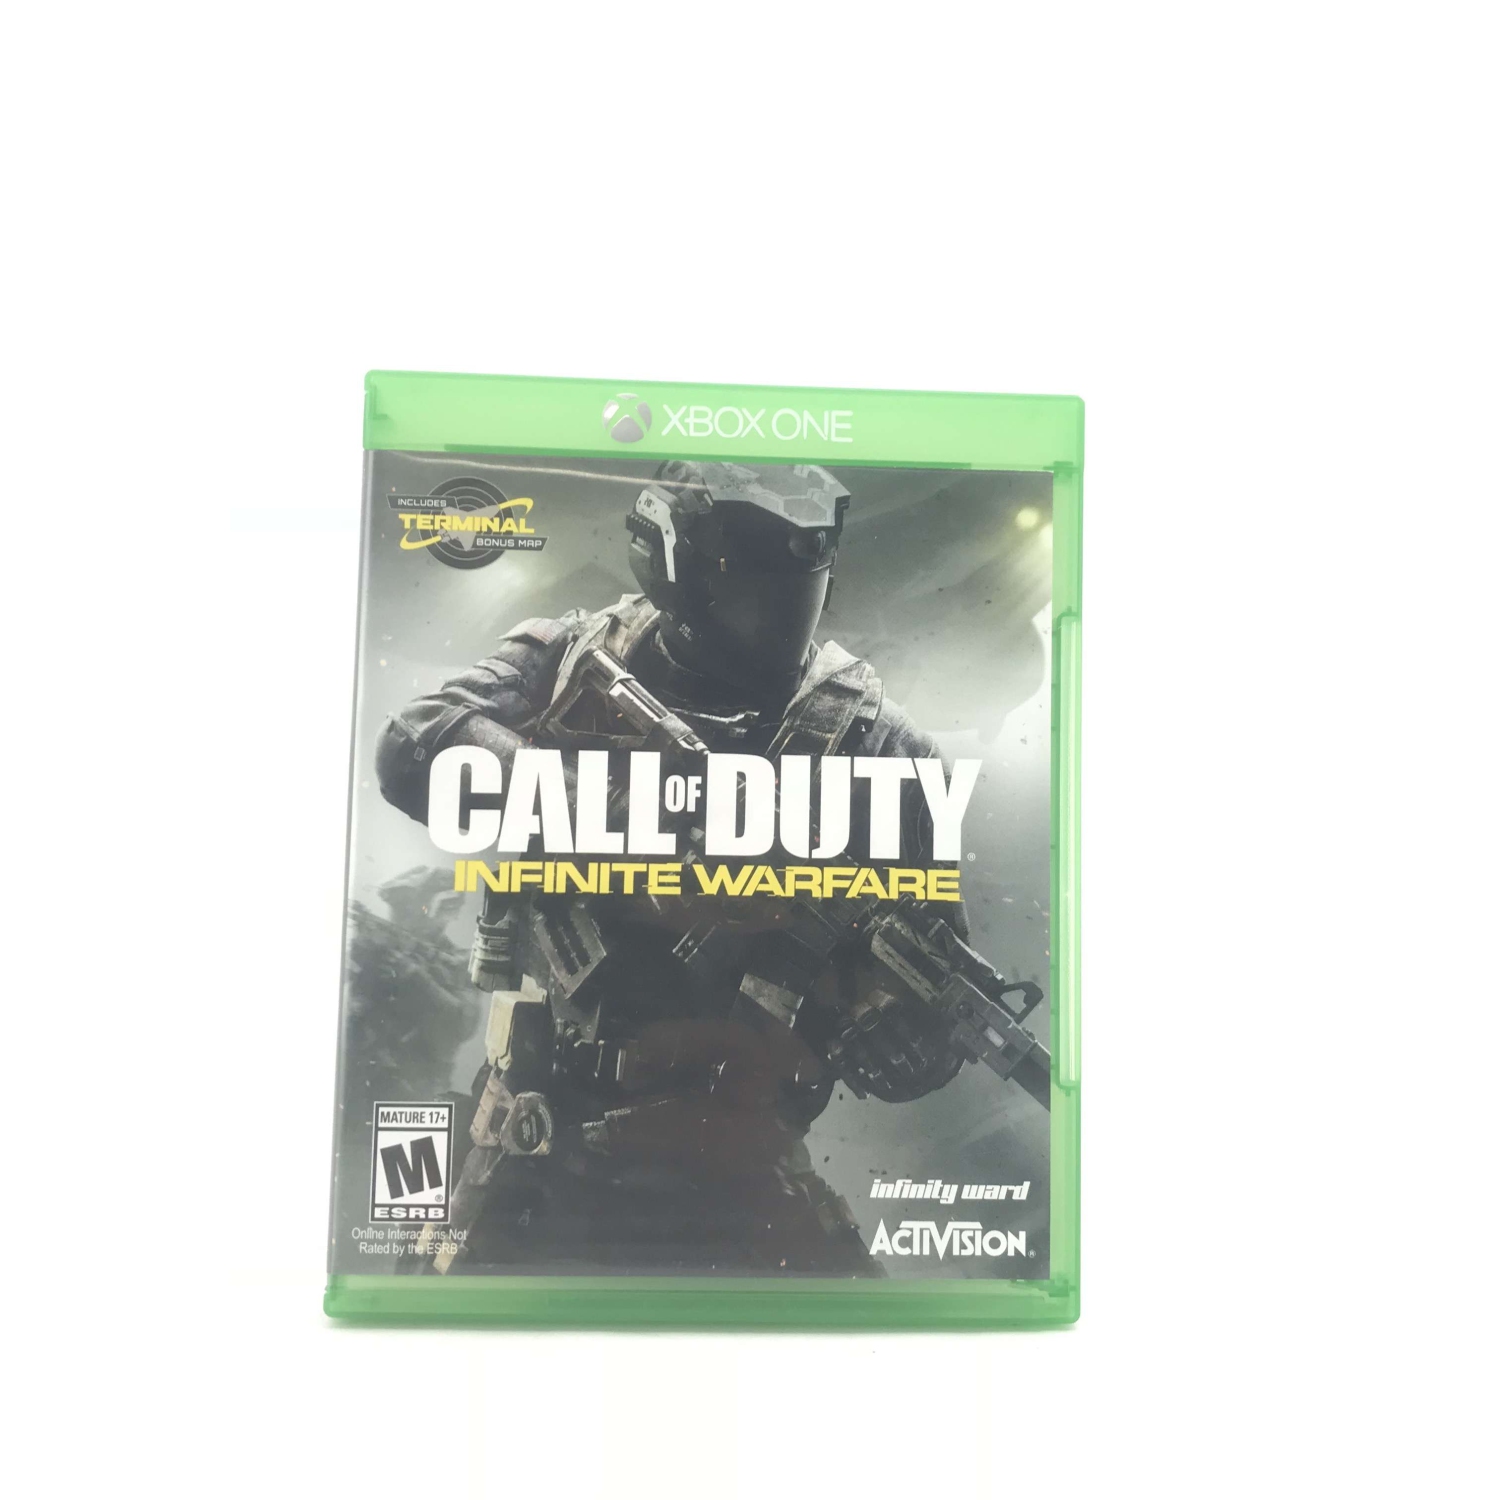 Call of Duty: Infinitive Warfare I Xbox One Video Game I Previously Played